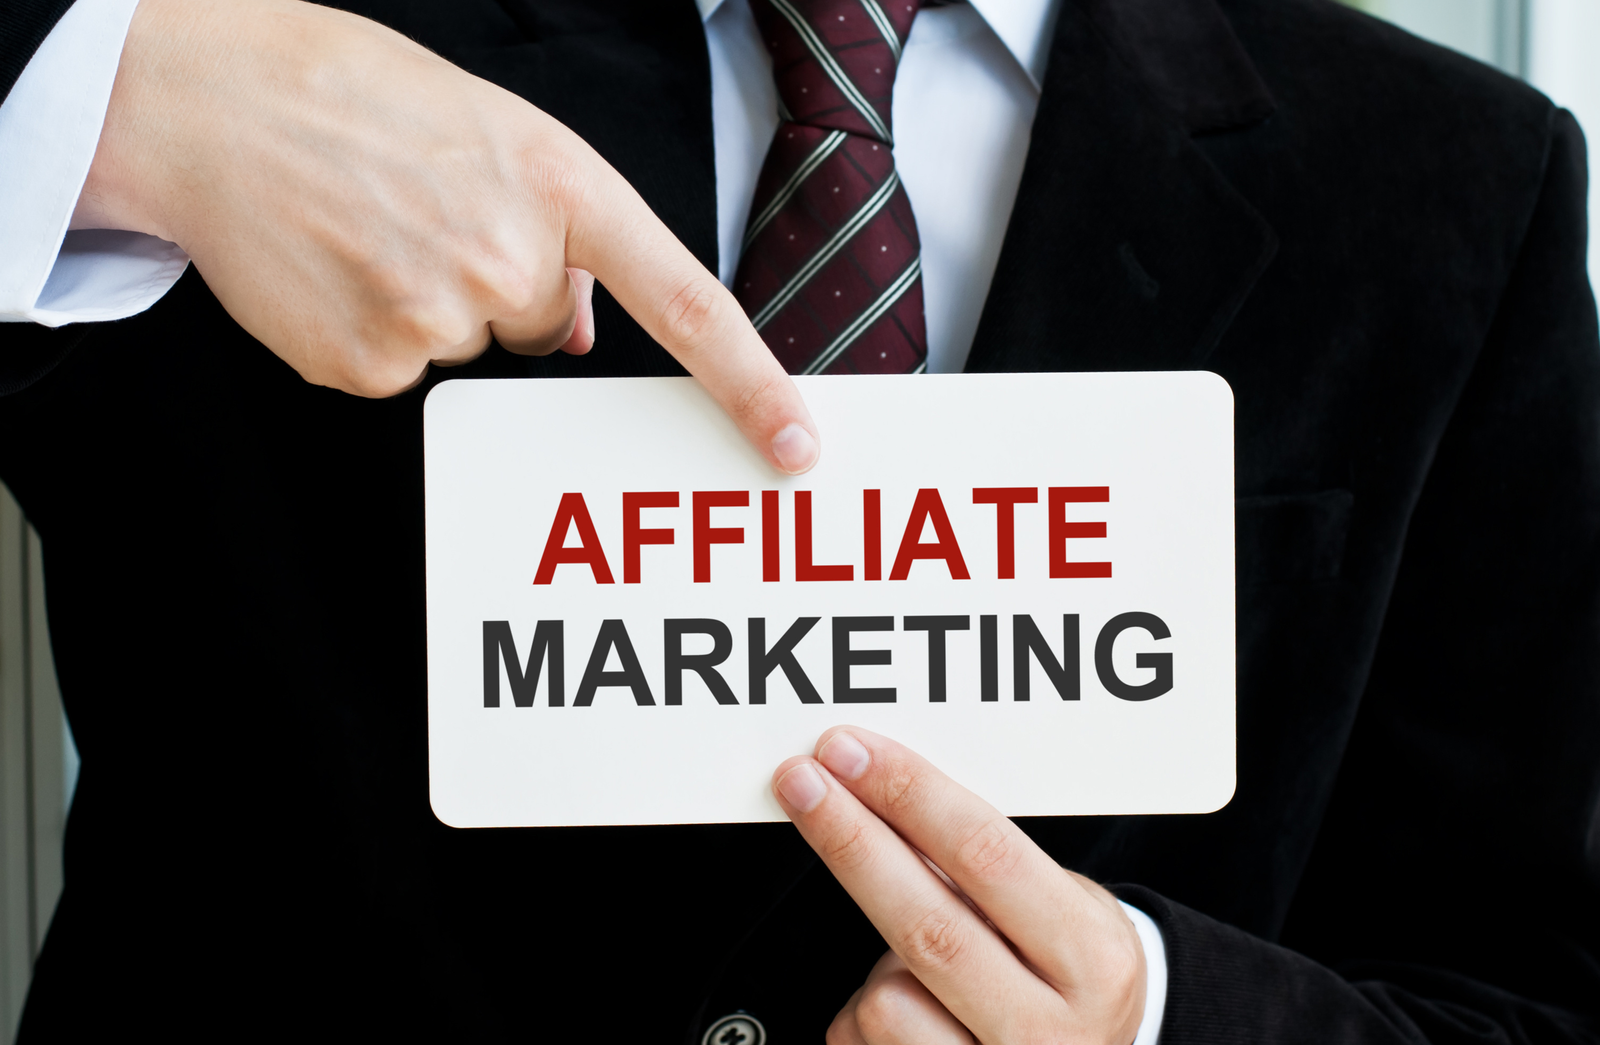 What is Affiliate Marketing – A Free Virtual Event